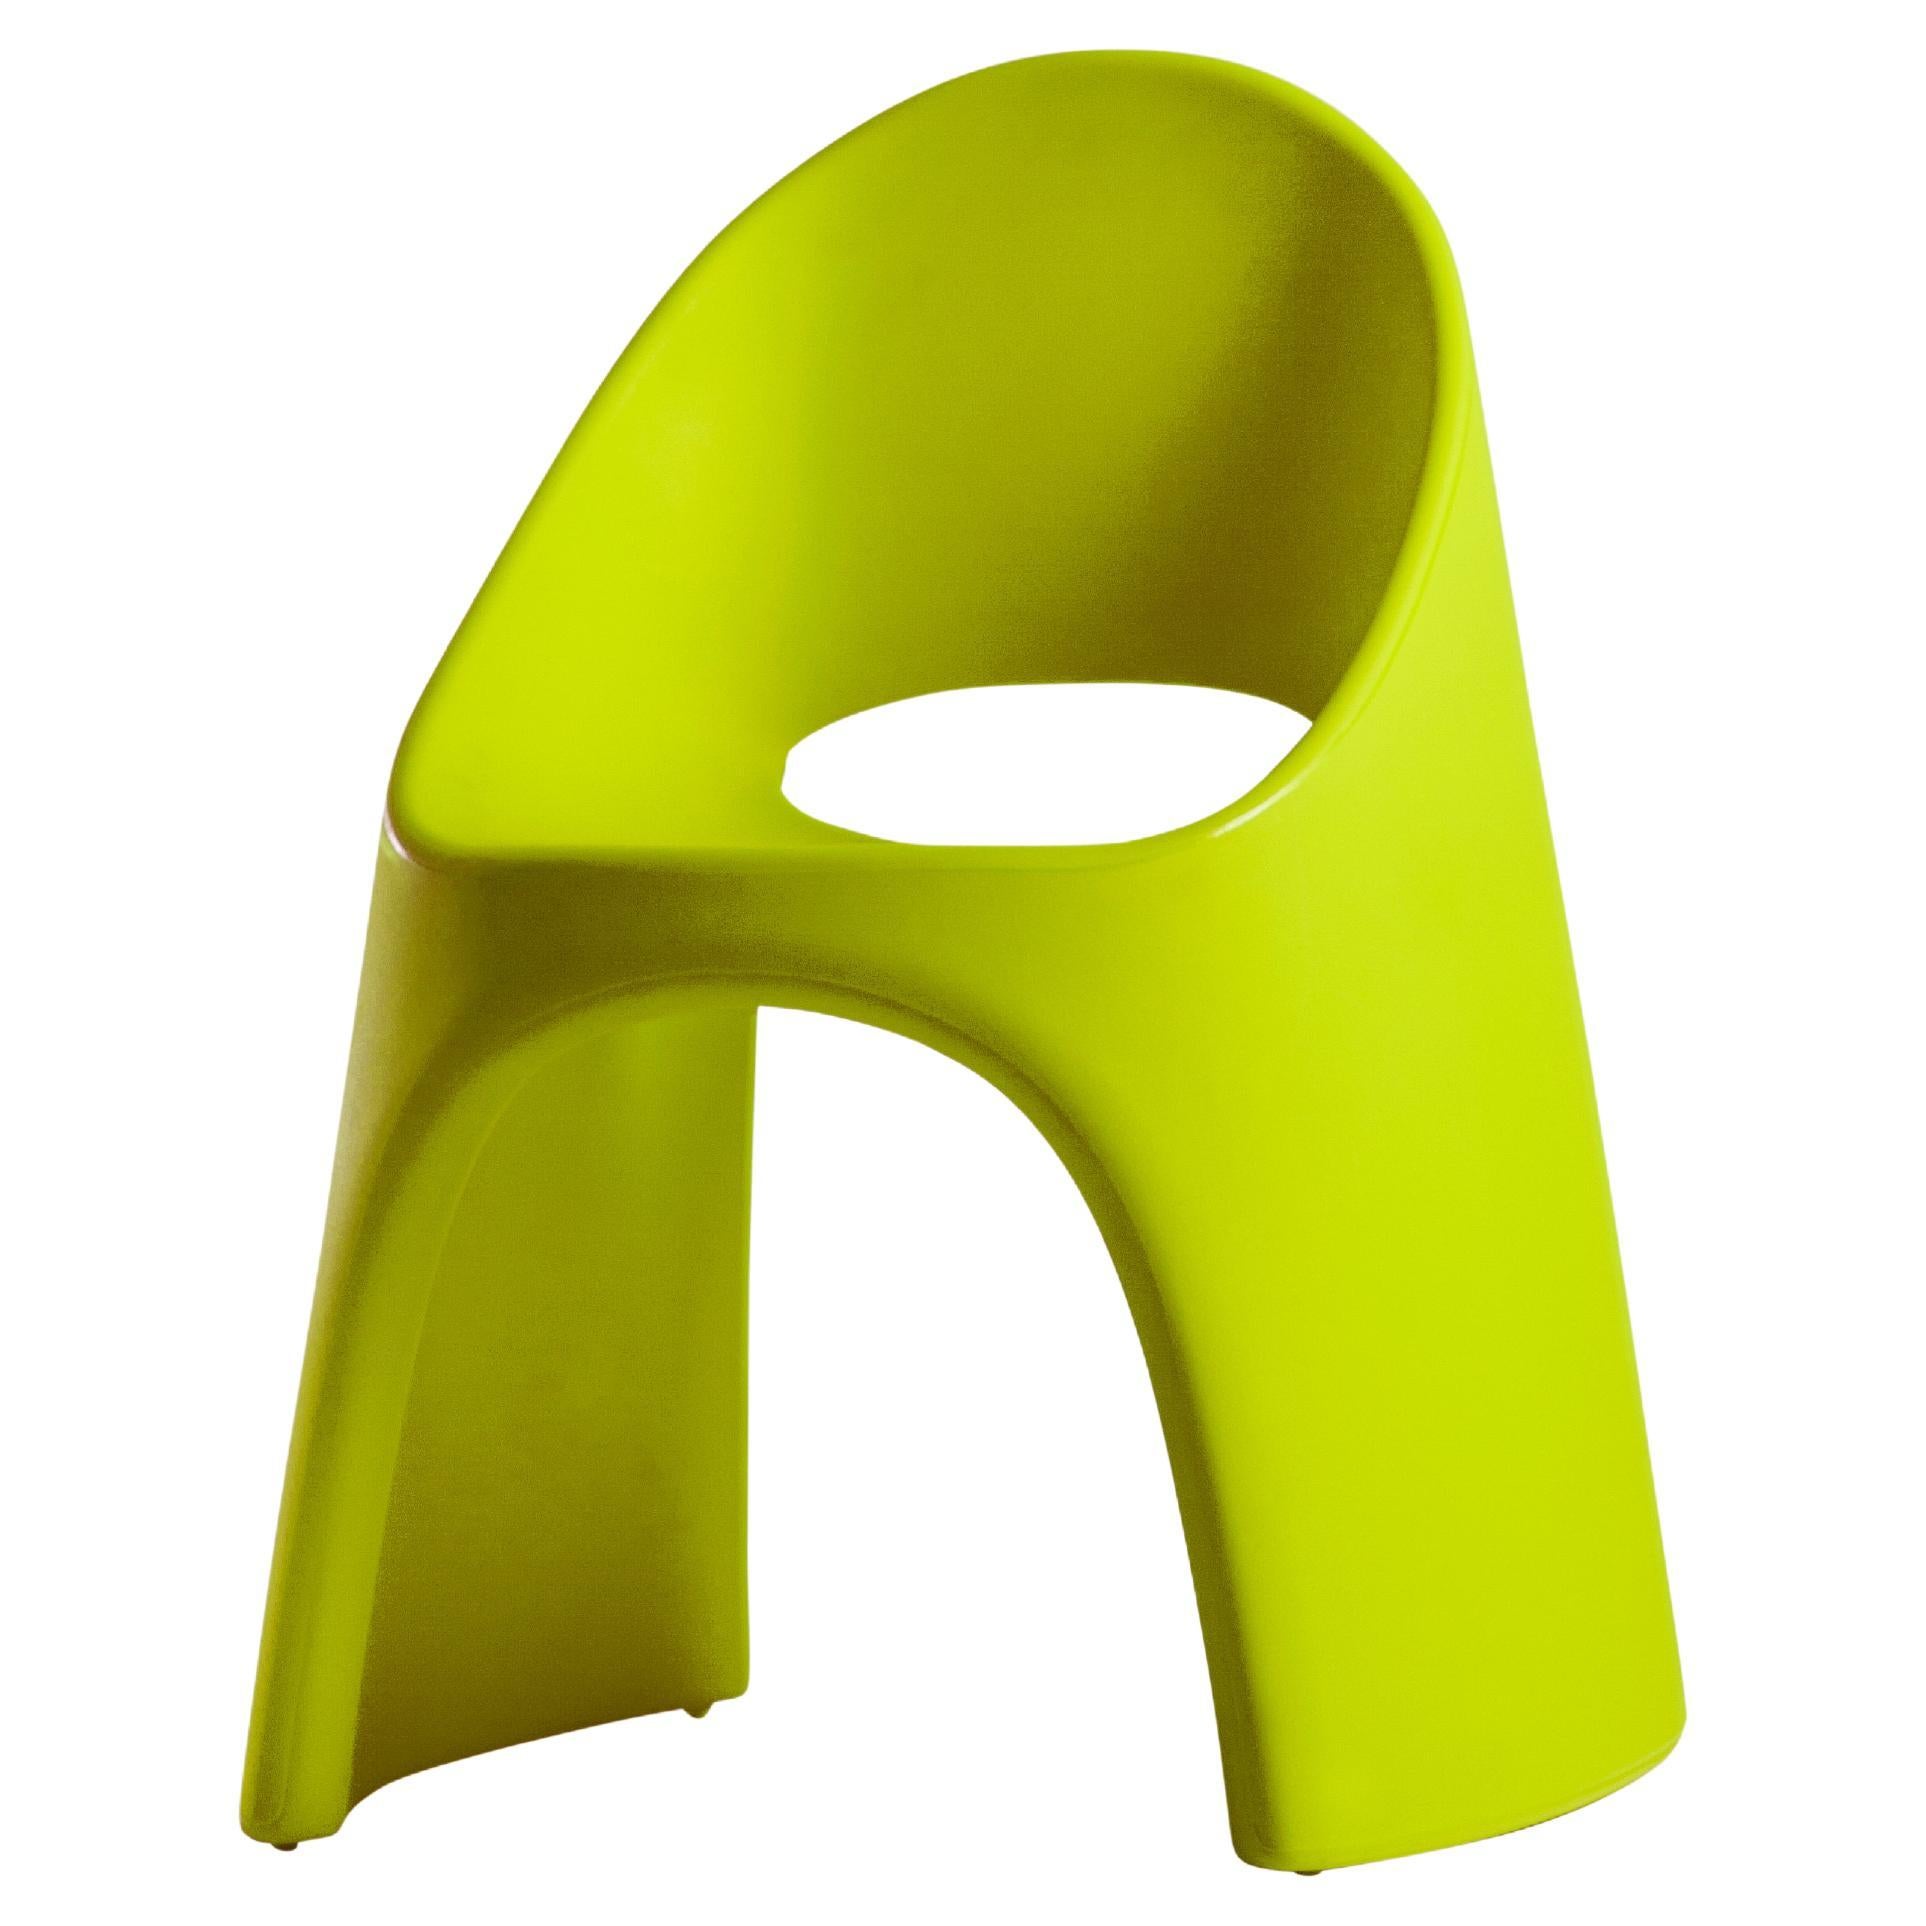 Slide Design Amélie Chair in Lime Green by Italo Pertichini For Sale